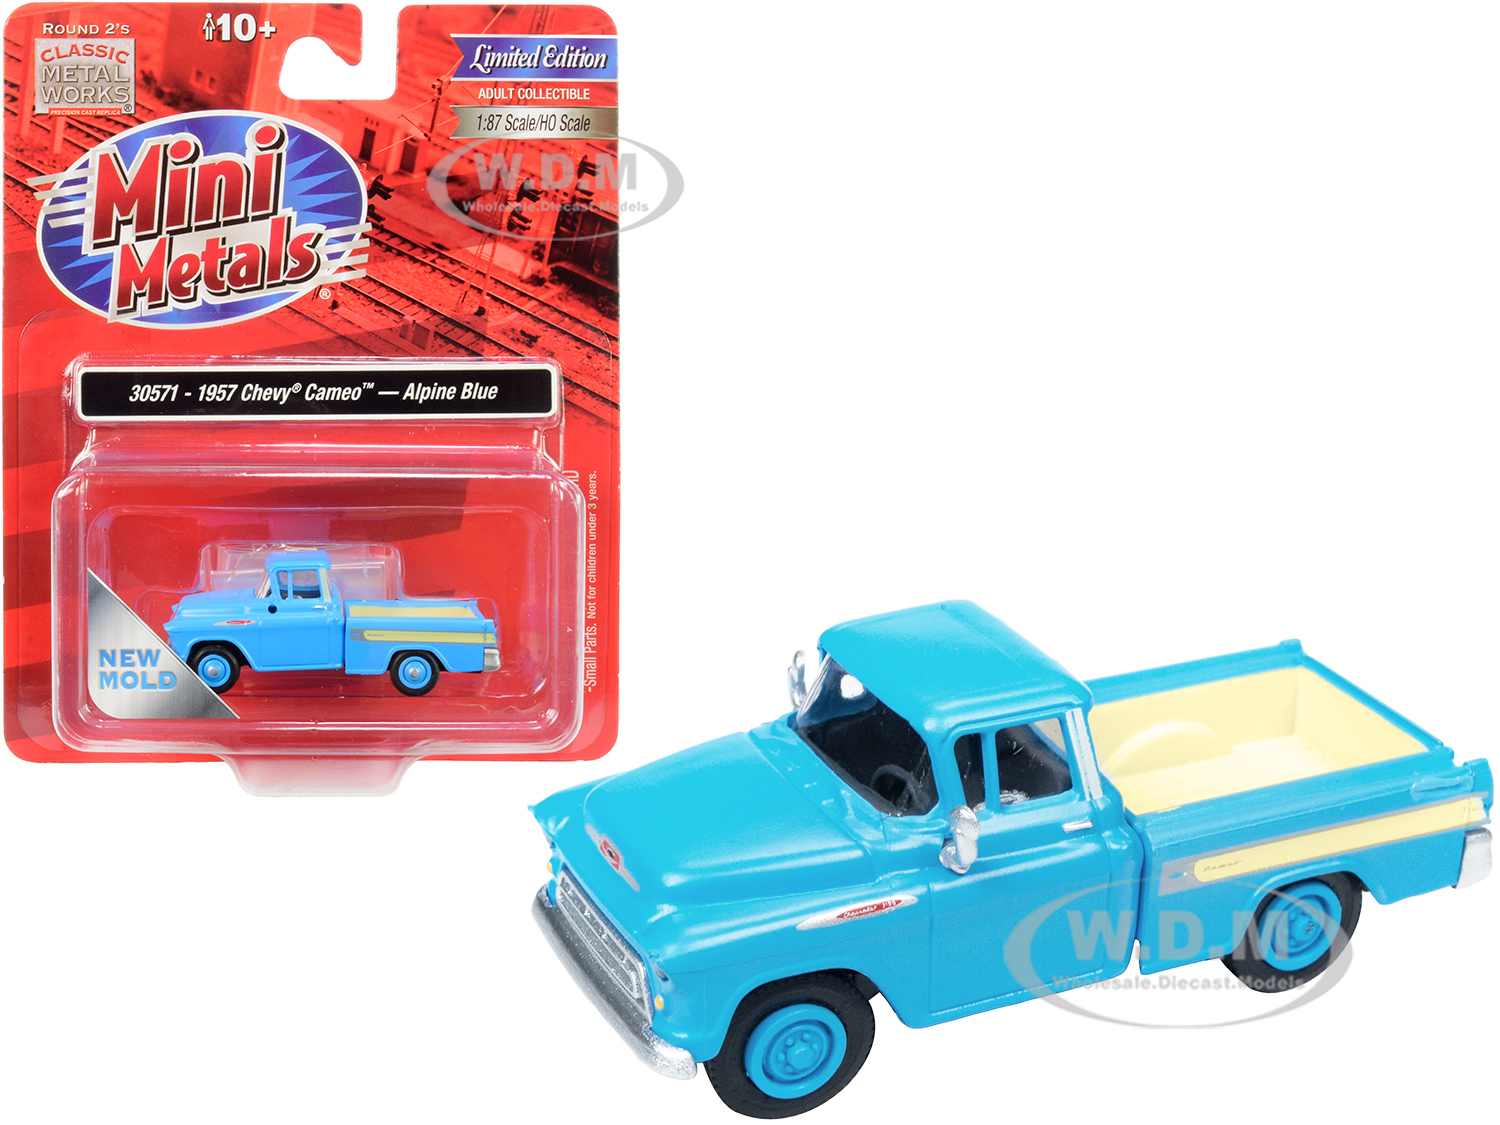 1957 Chevrolet Cameo Pickup Truck Alpine Blue 1/87 (ho) Scale Model Car By Classic Metal Works